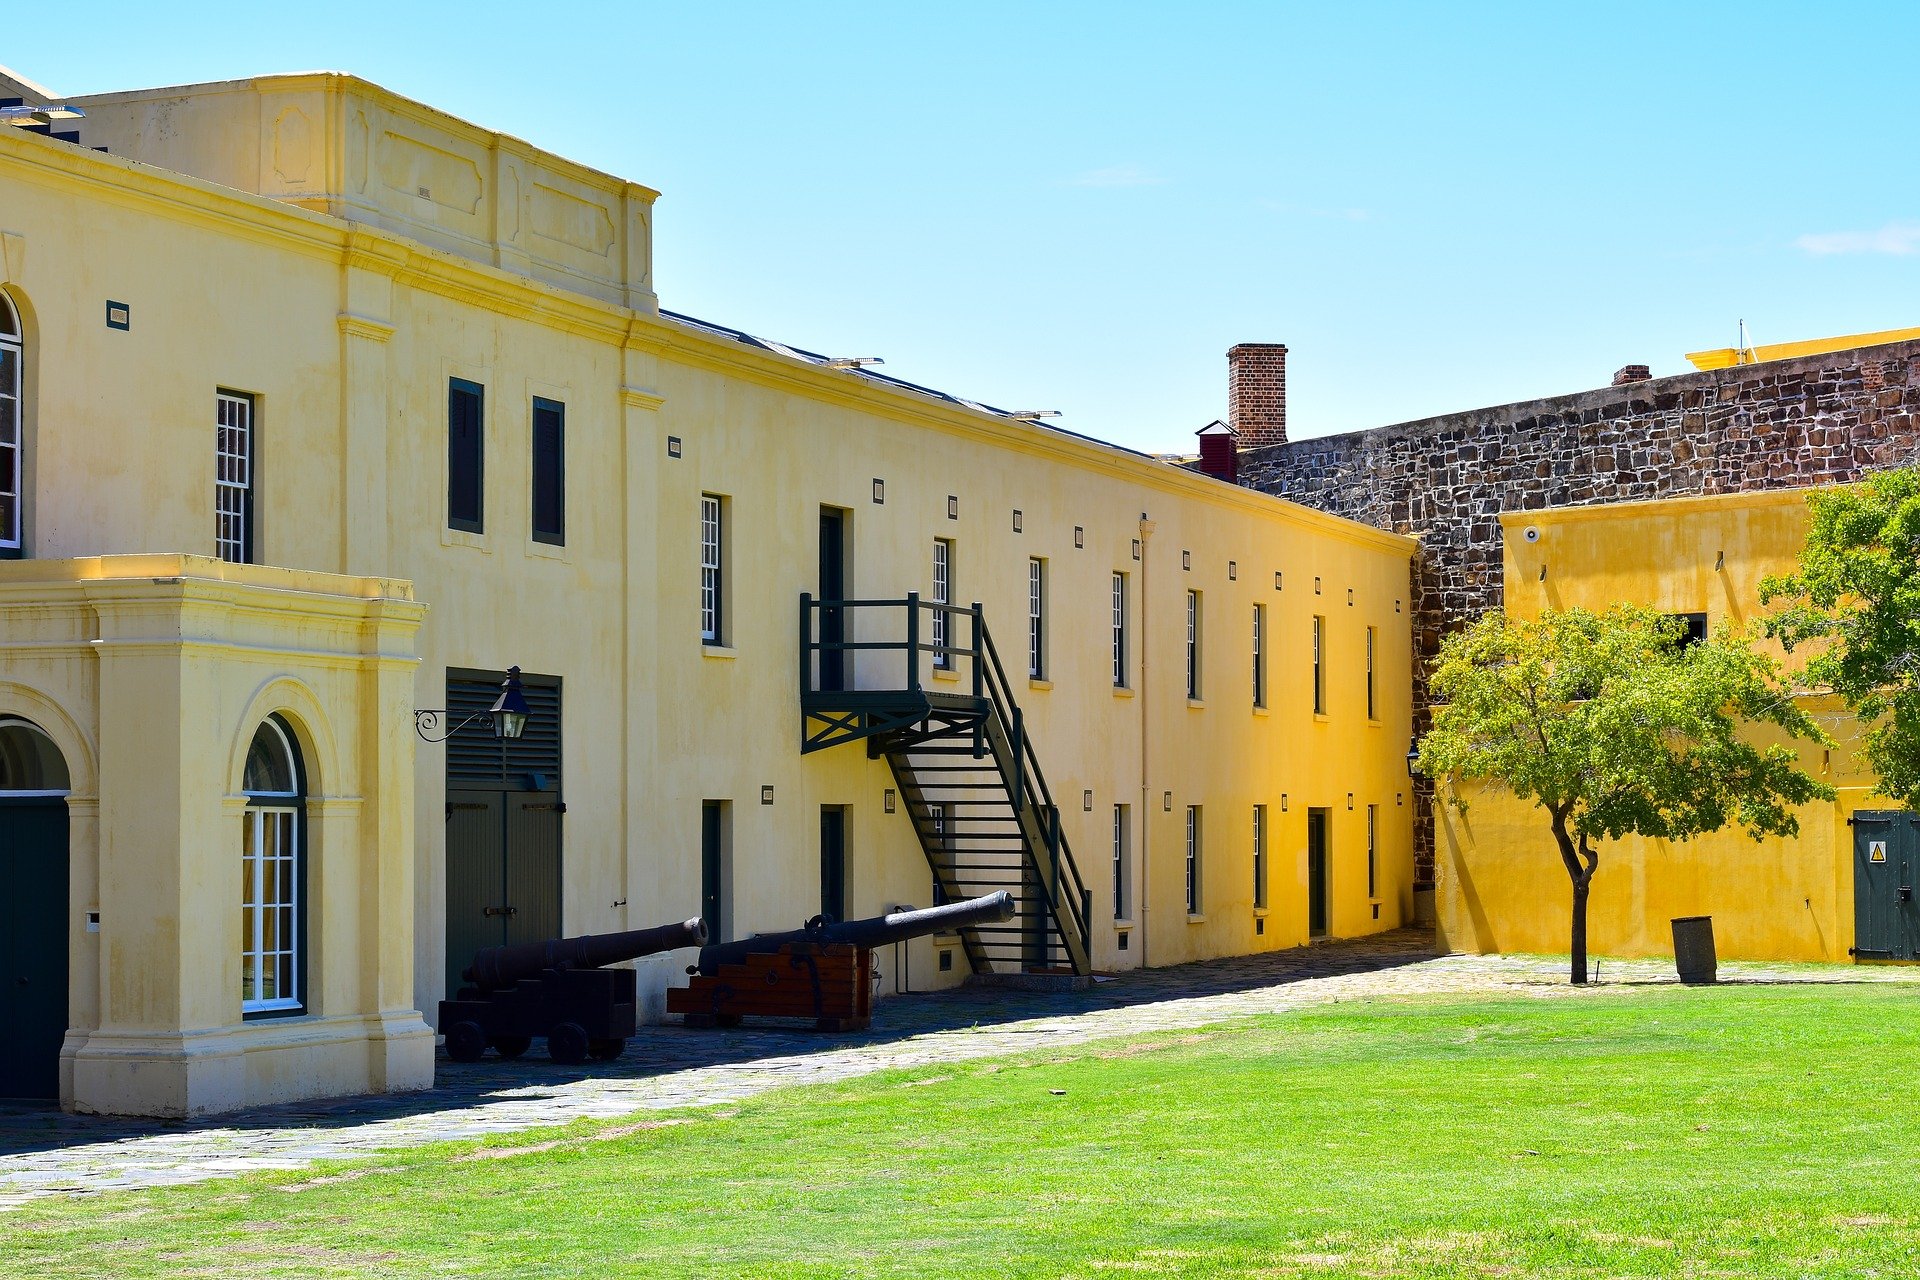 Castle of good hope in Cape Town.